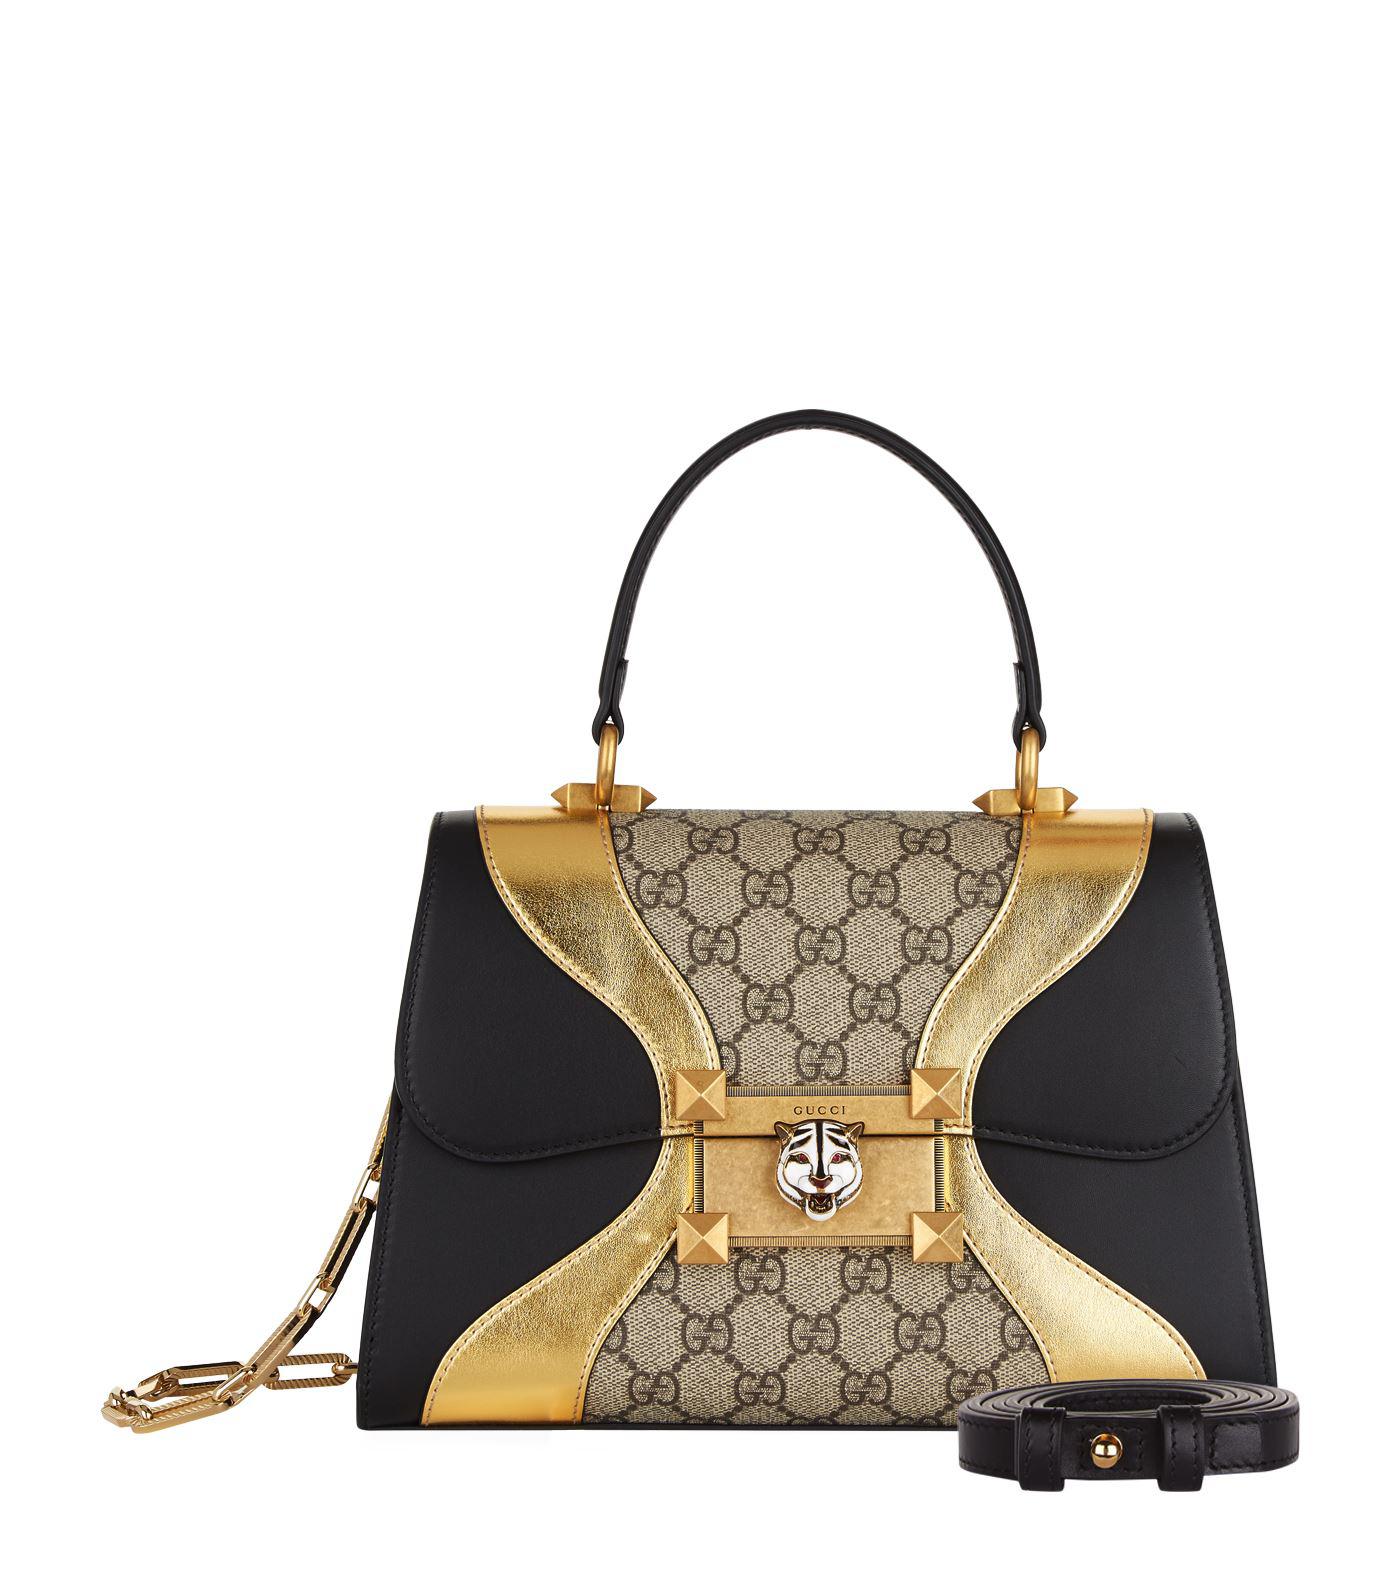 Gucci Leather Osiride Top Handle Bag in 